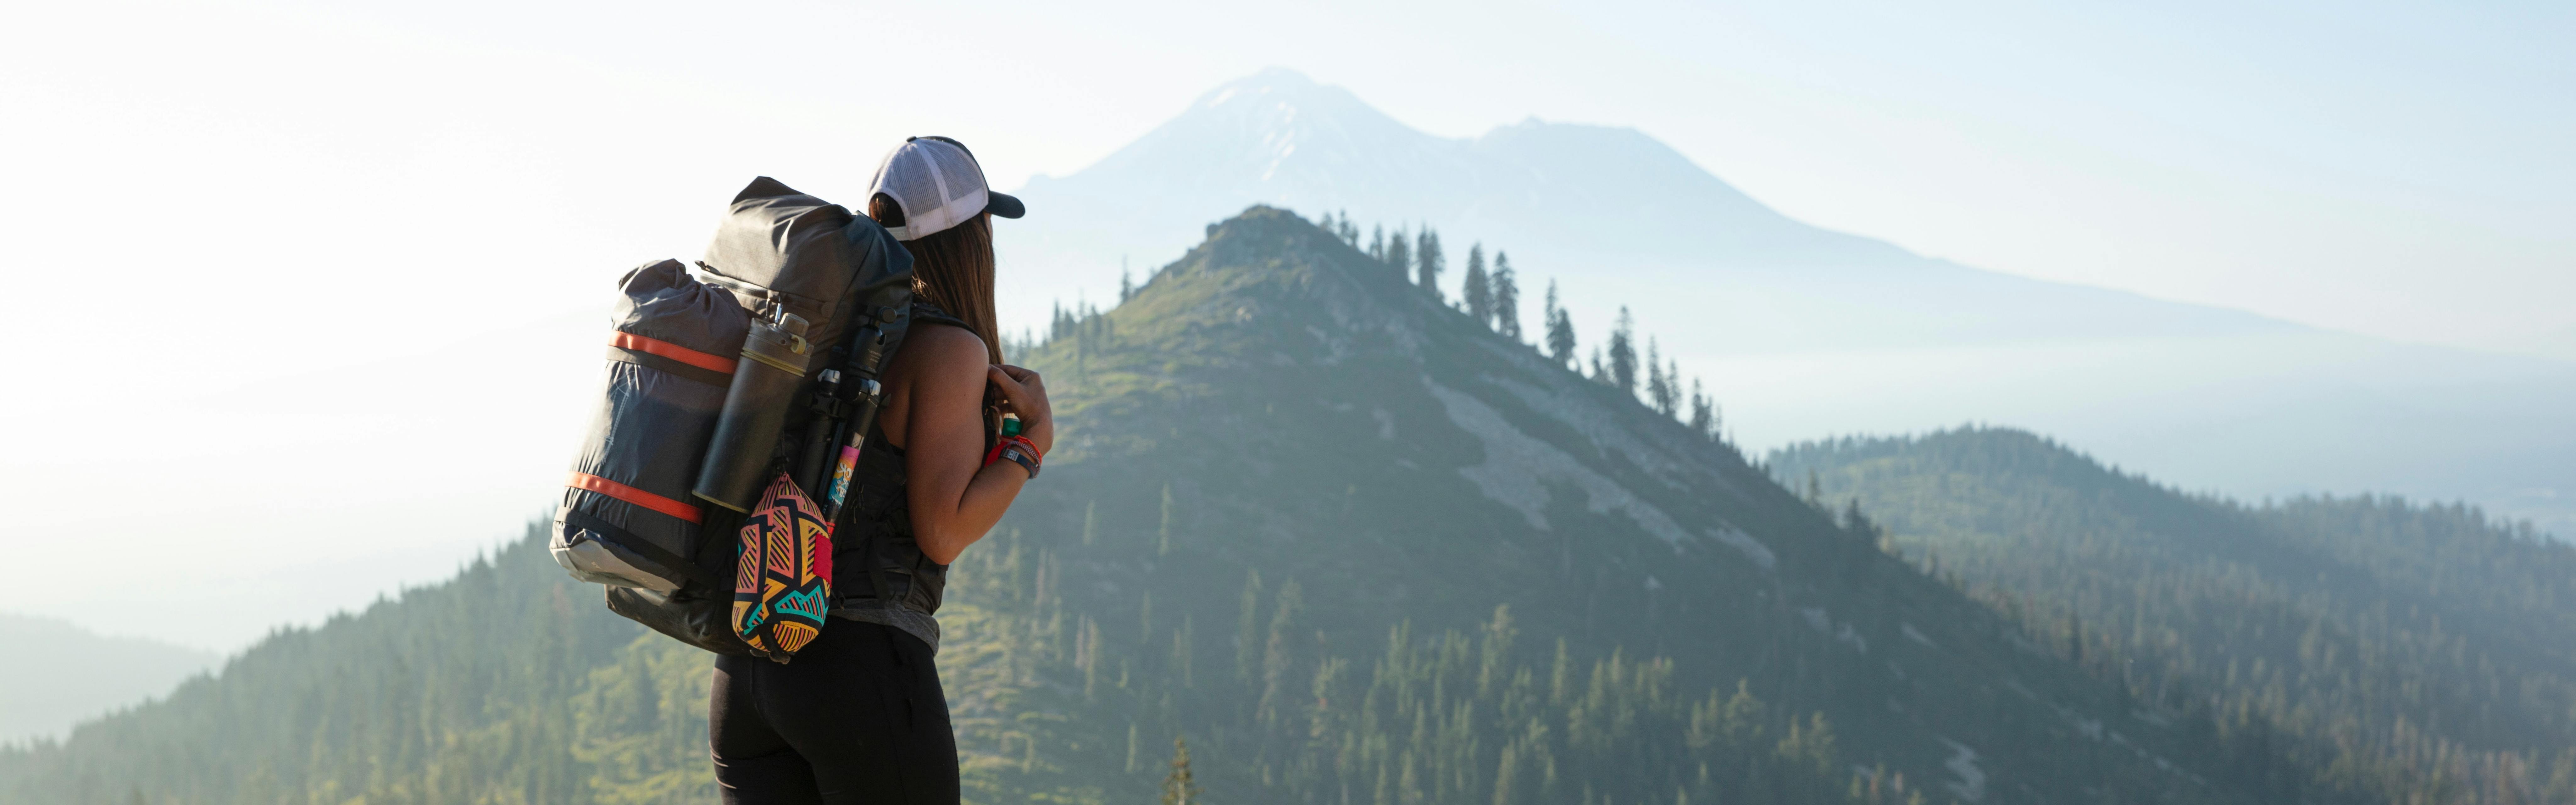 A woman stands with a backpacking pack on and looks toward mountains in the background.